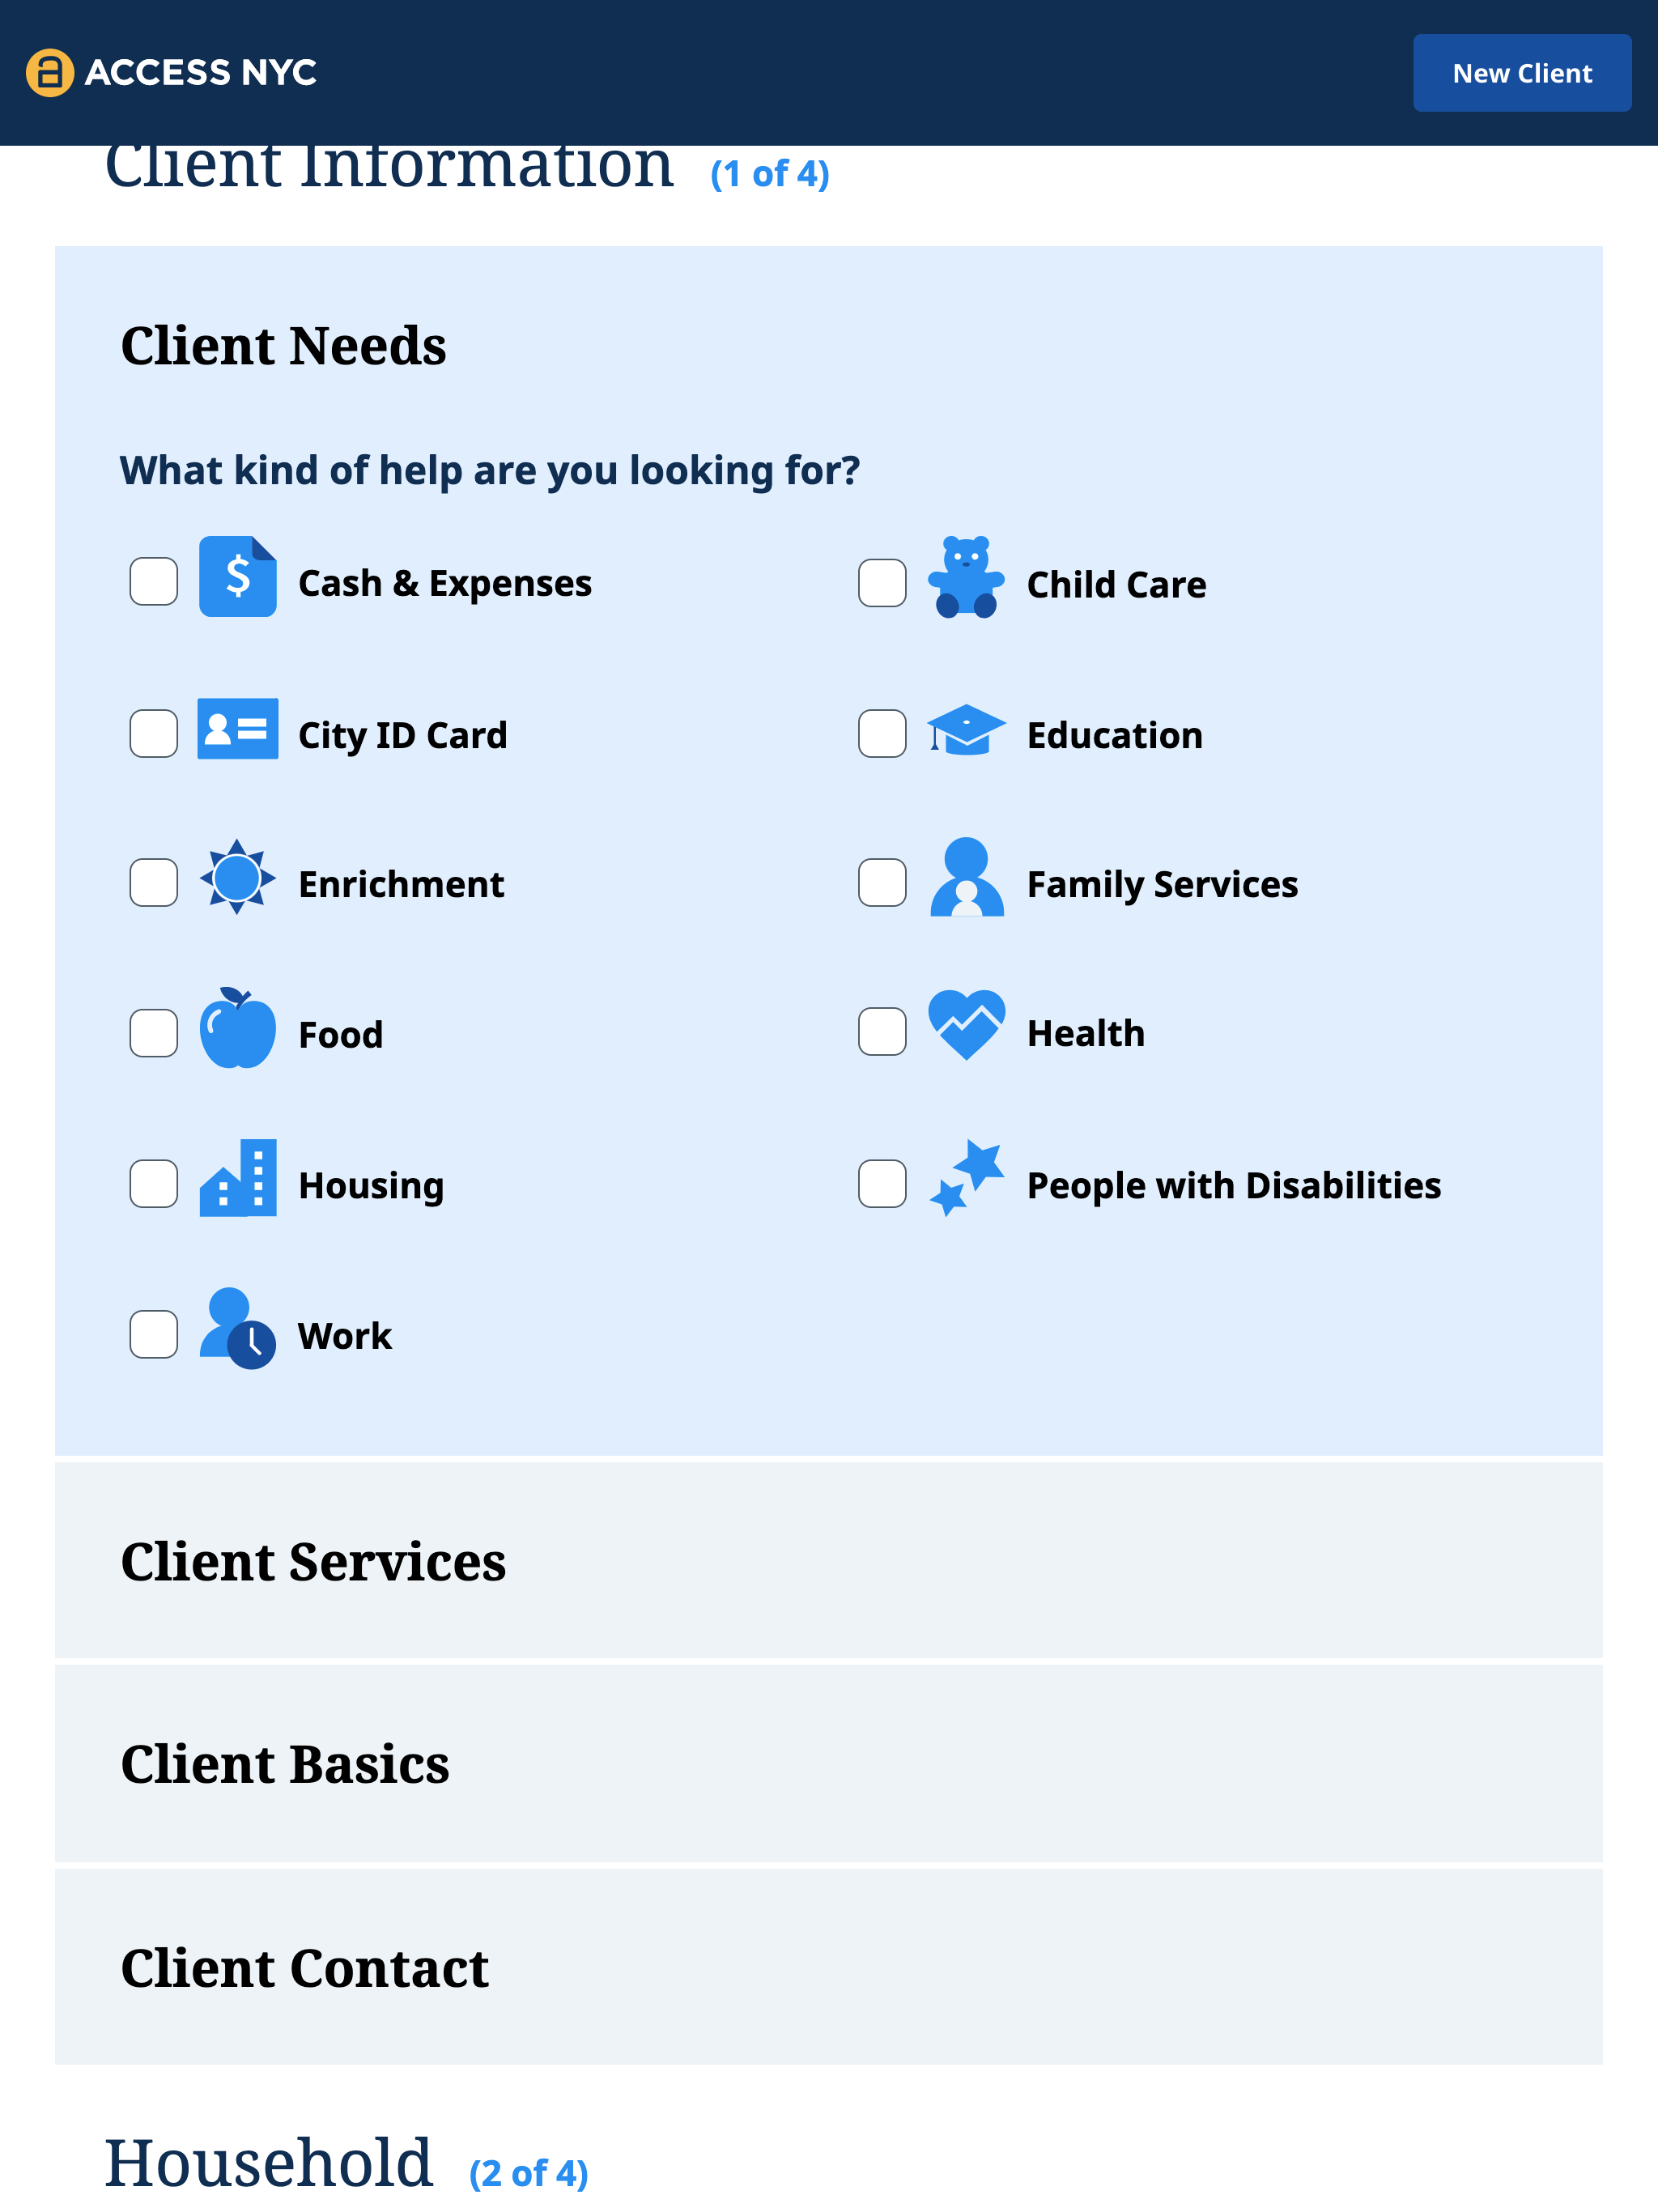 Screenshot of the client needs section